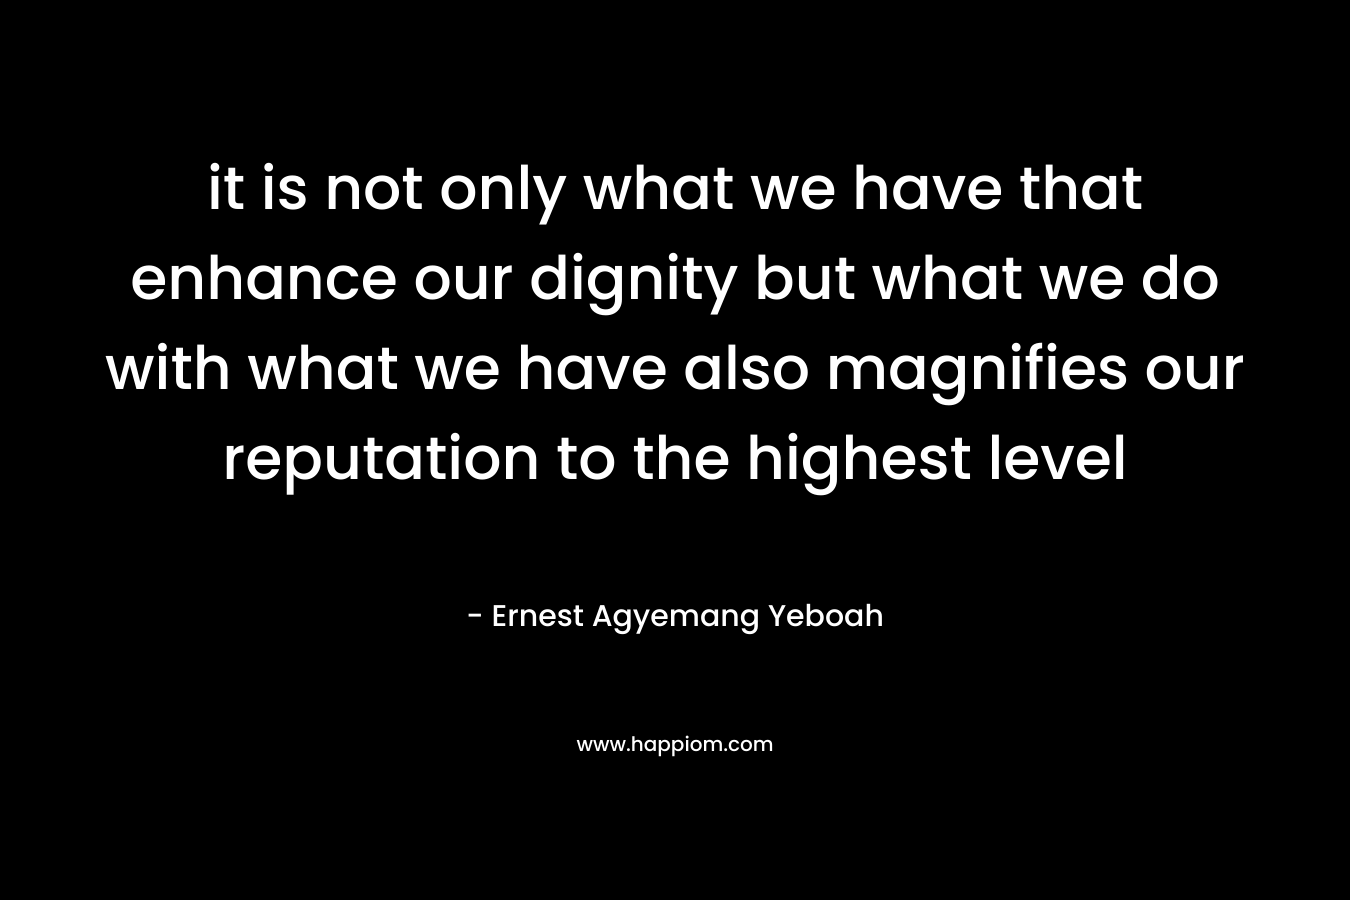 it is not only what we have that enhance our dignity but what we do with what we have also magnifies our reputation to the highest level